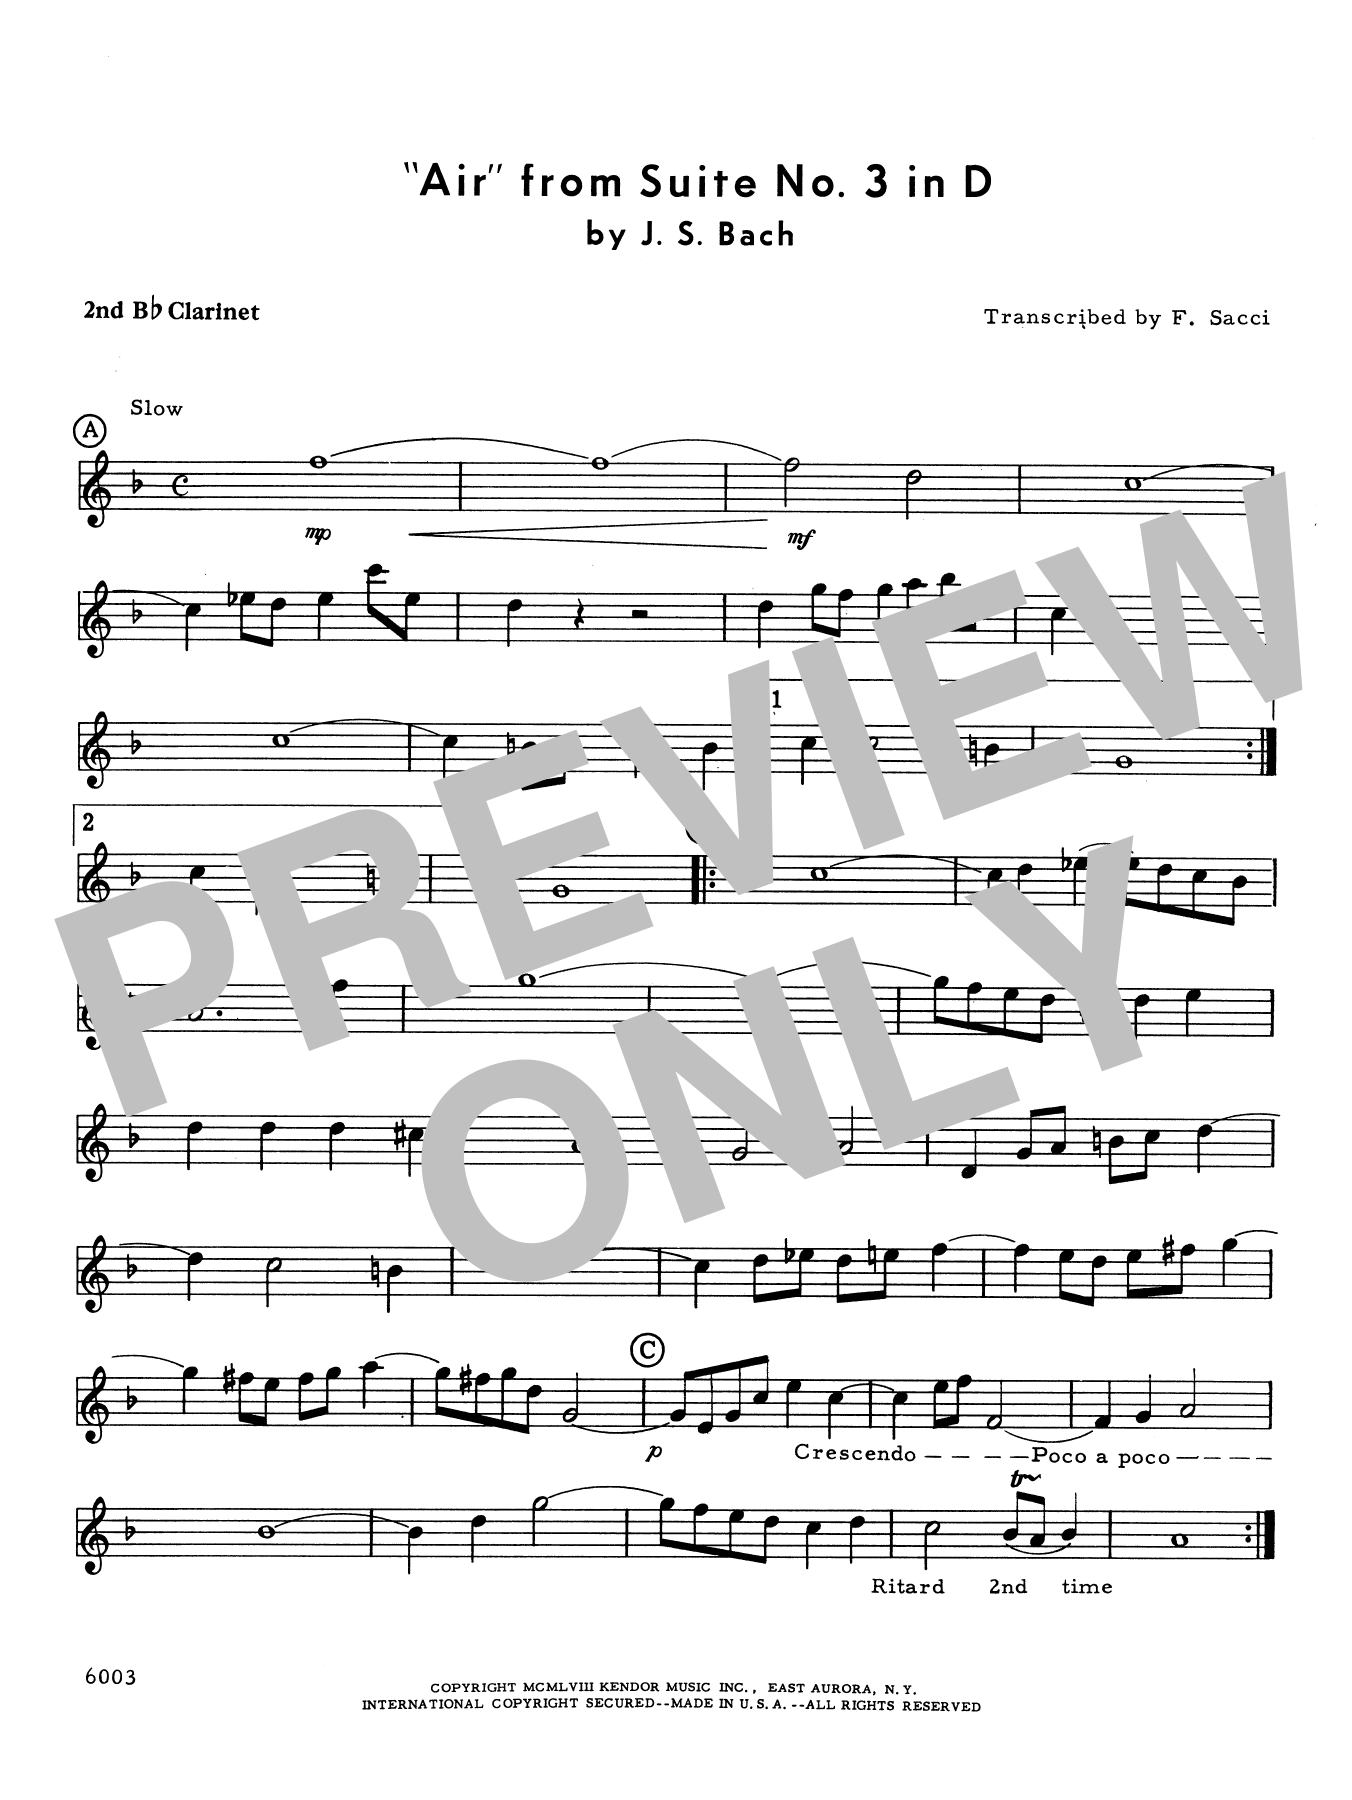 Download Frank J. Sacci Air From Suite #3 In D - 2nd Bb Clarine Sheet Music